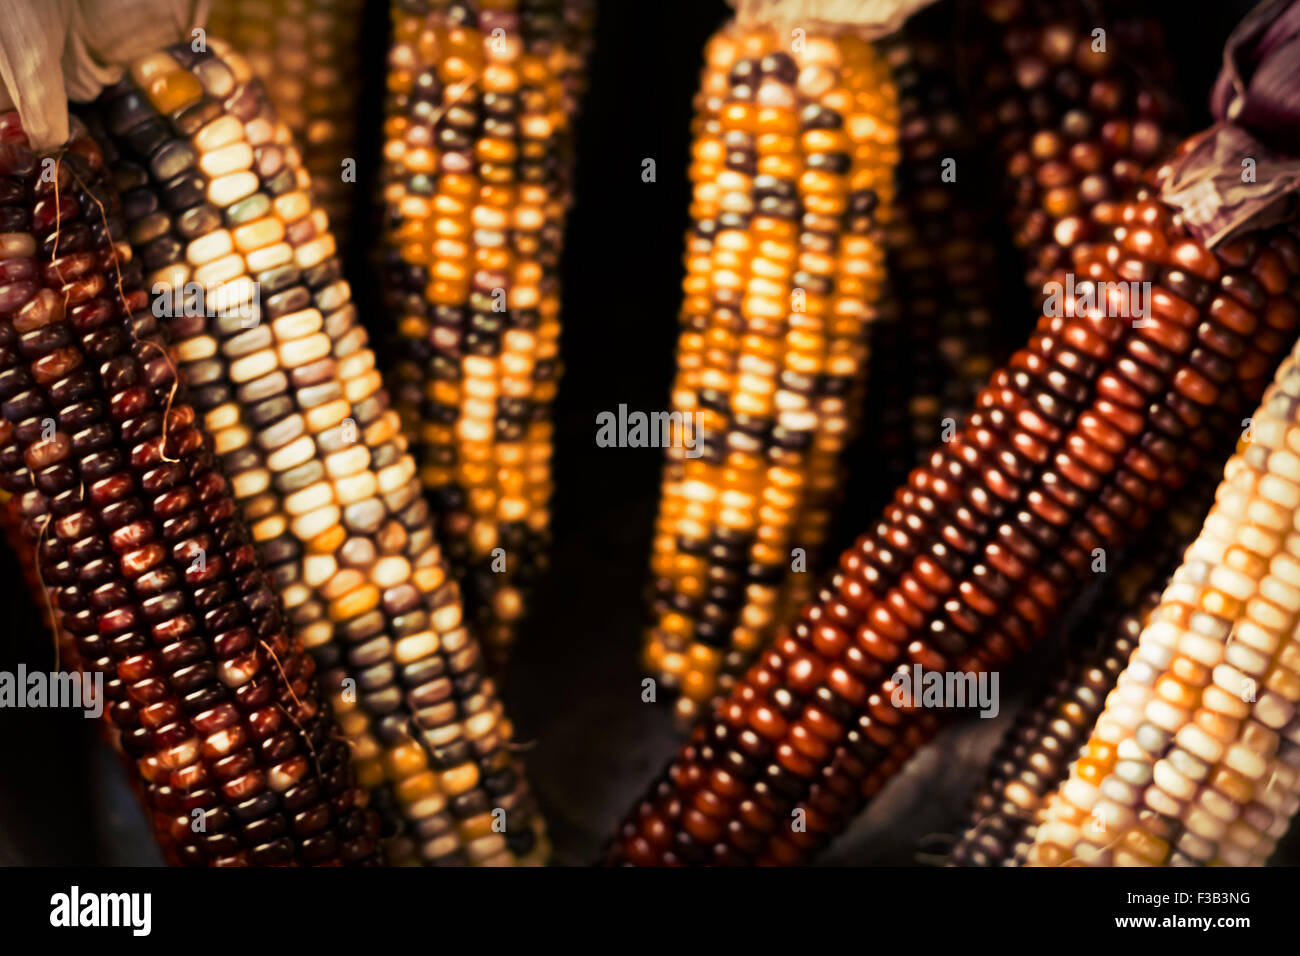 Dried decorative Indian corn for Autumn themed background image Stock Photo